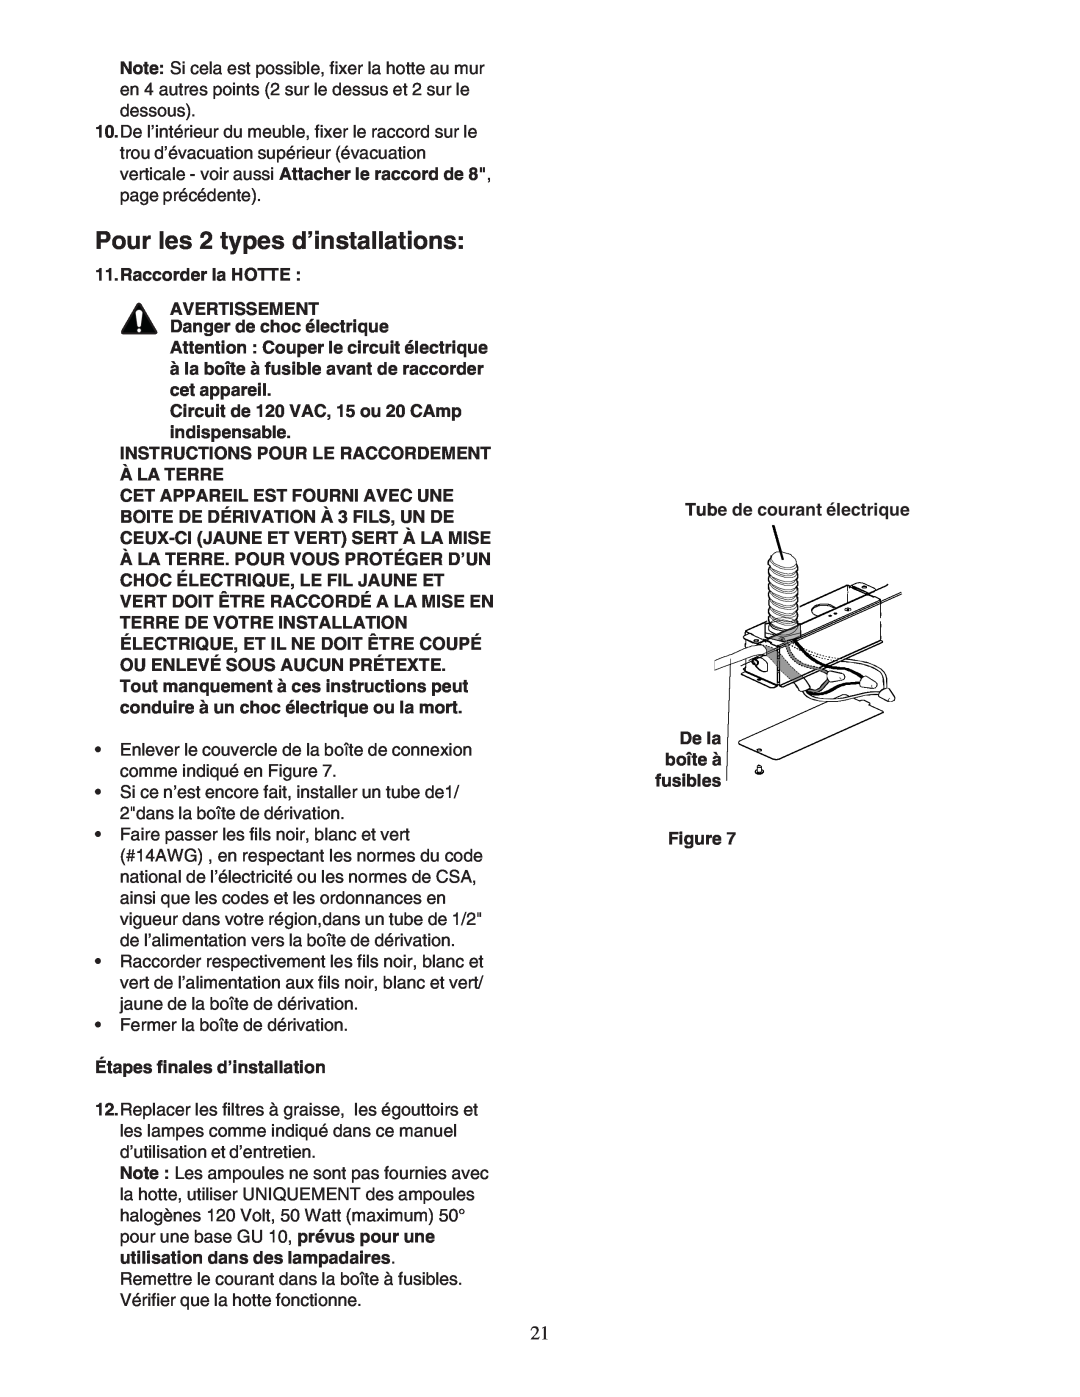 Thermador PHH36DS, PHH30DS manual Pour les 2 types d’installations 